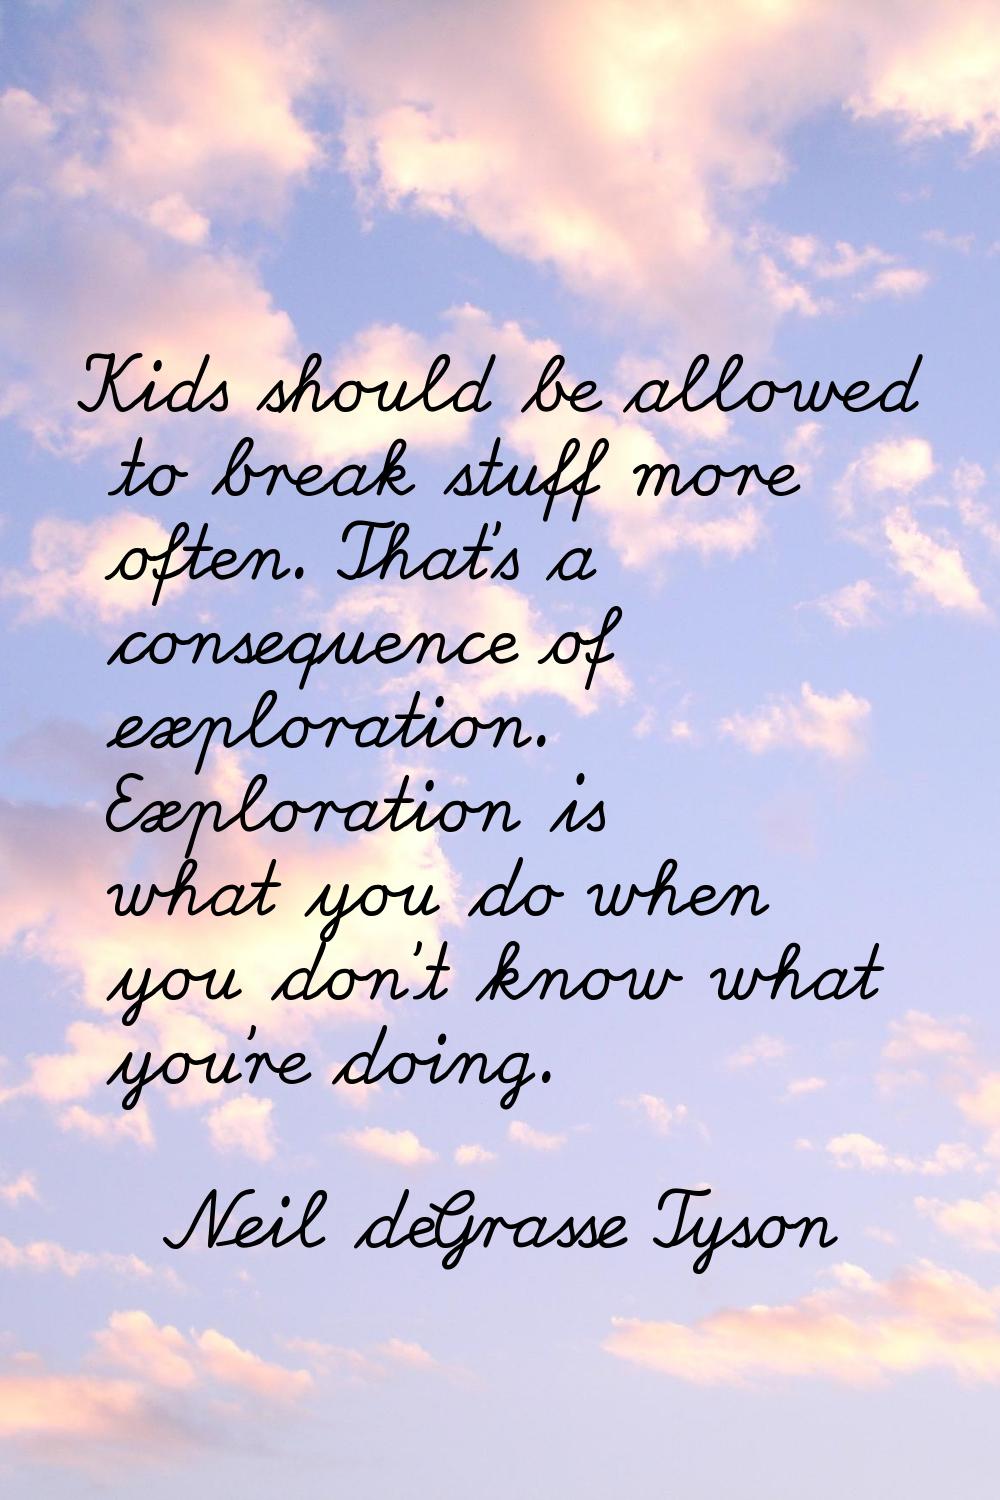 Kids should be allowed to break stuff more often. That's a consequence of exploration. Exploration 